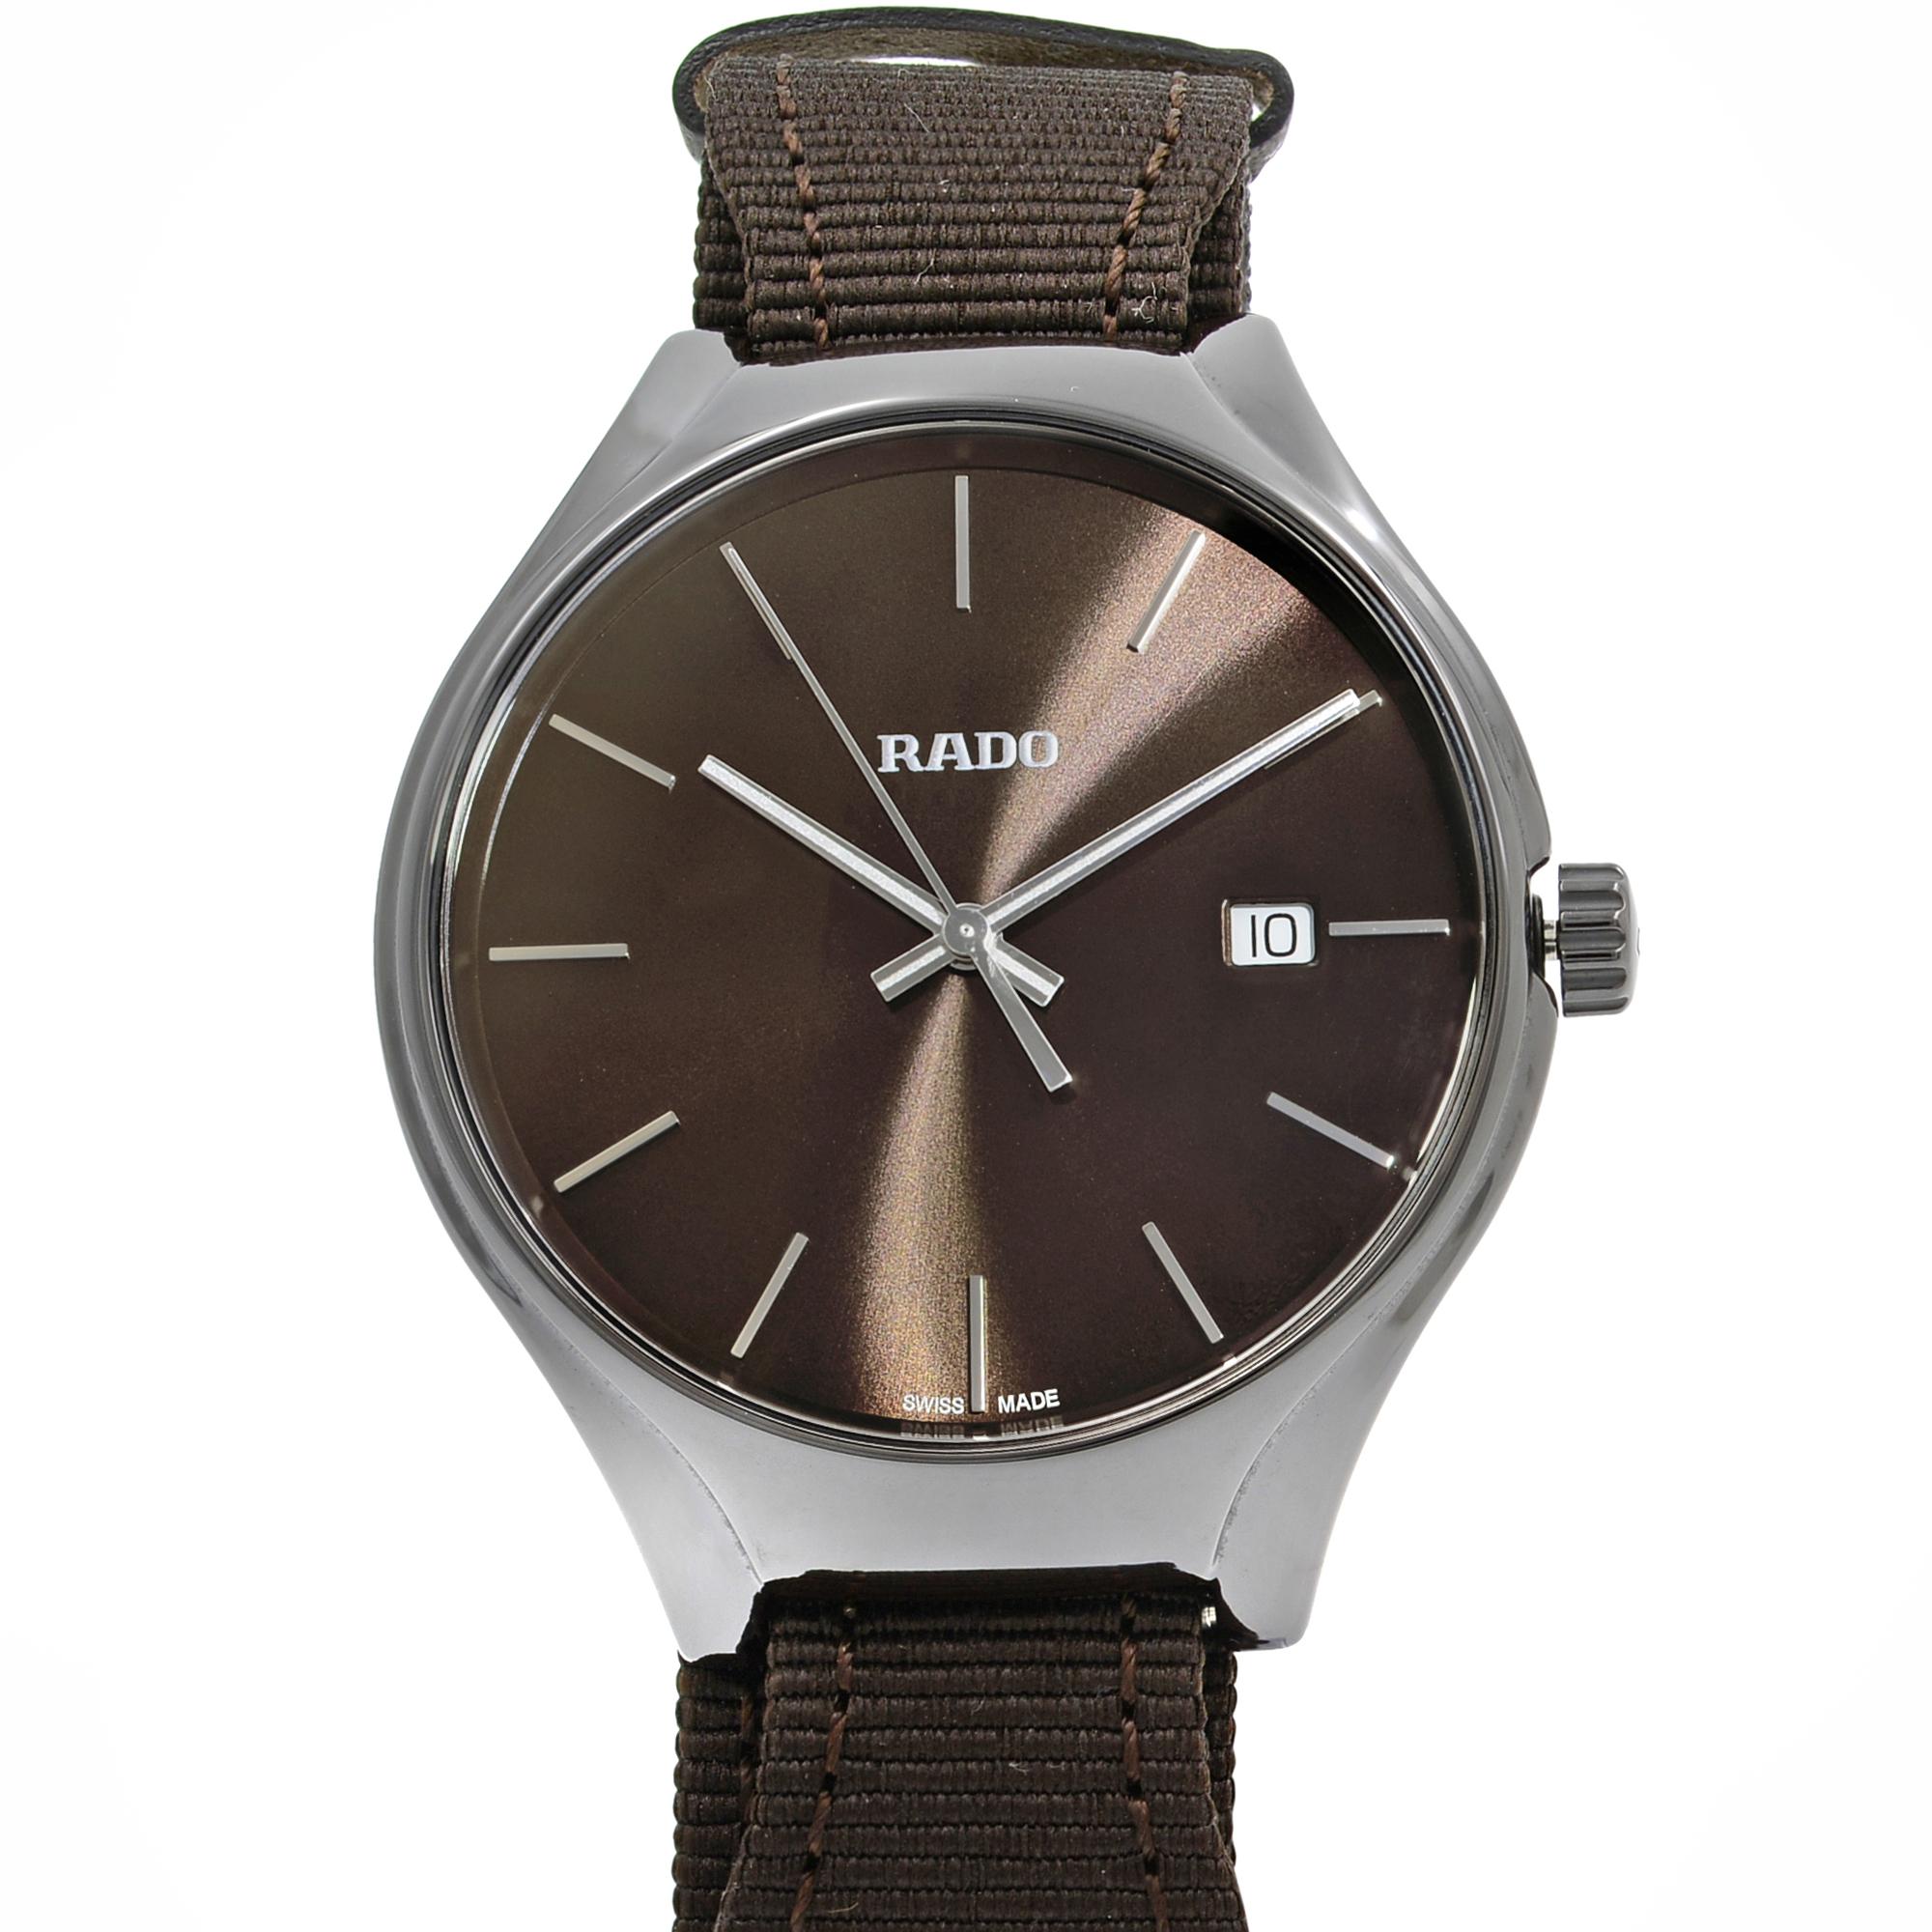 This brand new Rado True R27234306 is a beautiful men's timepiece that is powered by a quartz movement which is cased in a ceramic case. It has a round shape face, date dial and has hand sticks style markers. It is completed with a fabric/canvas